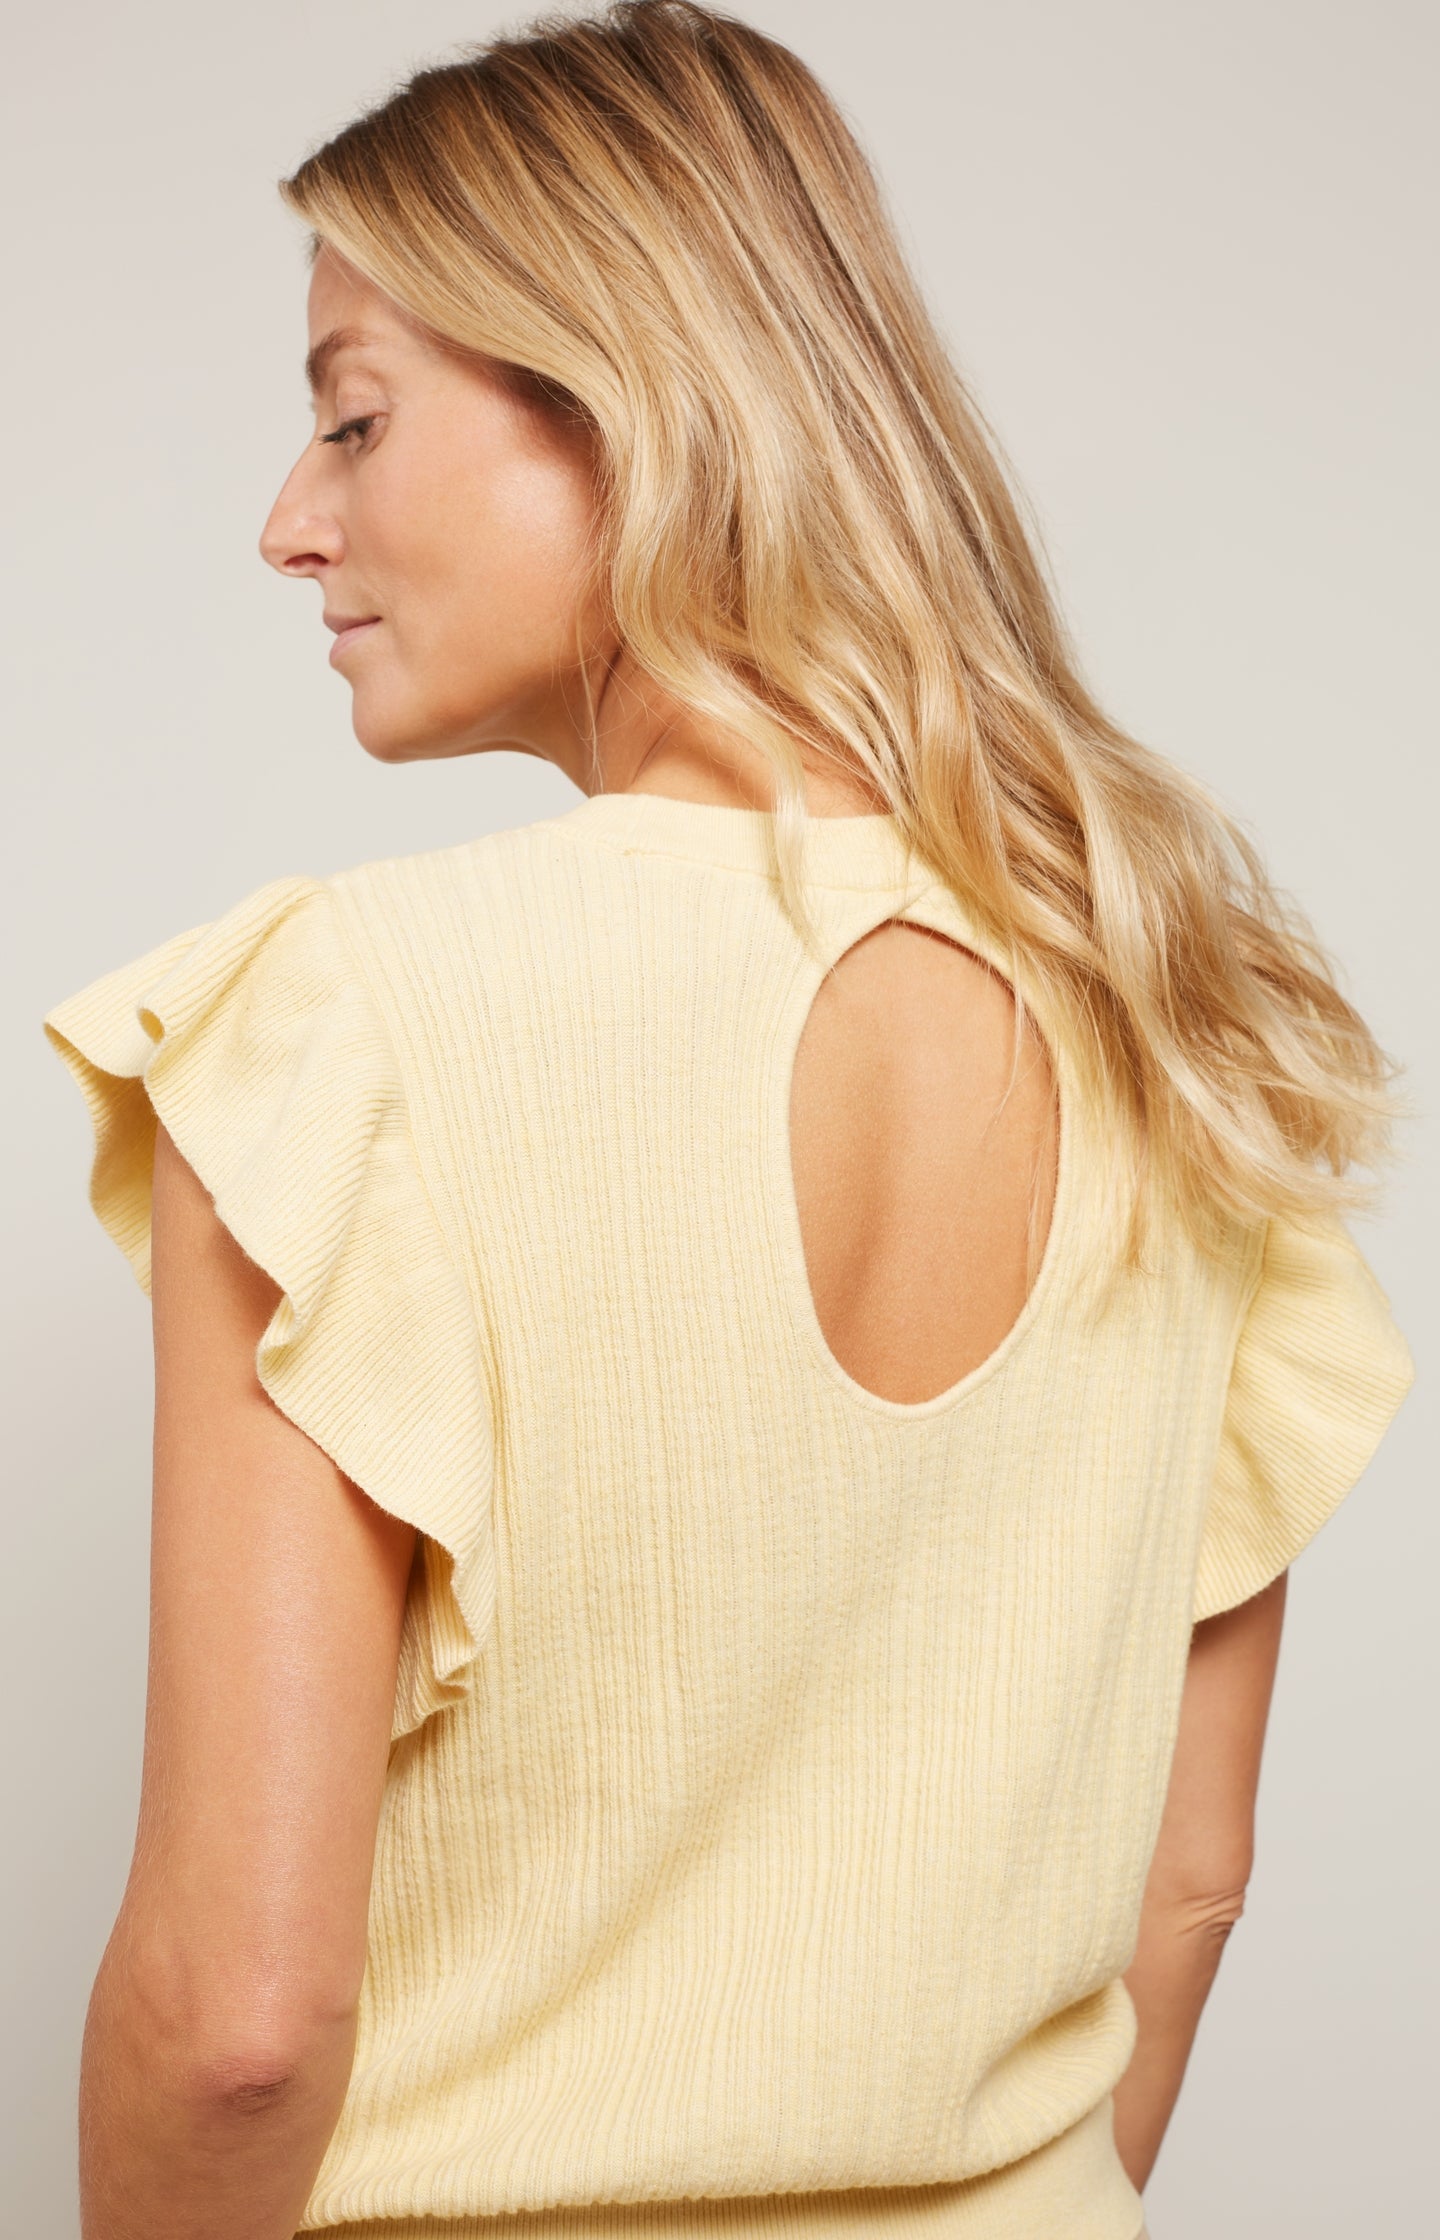 Sweater with round neck, ruffled cap sleeves and back detail - Type: lookbook